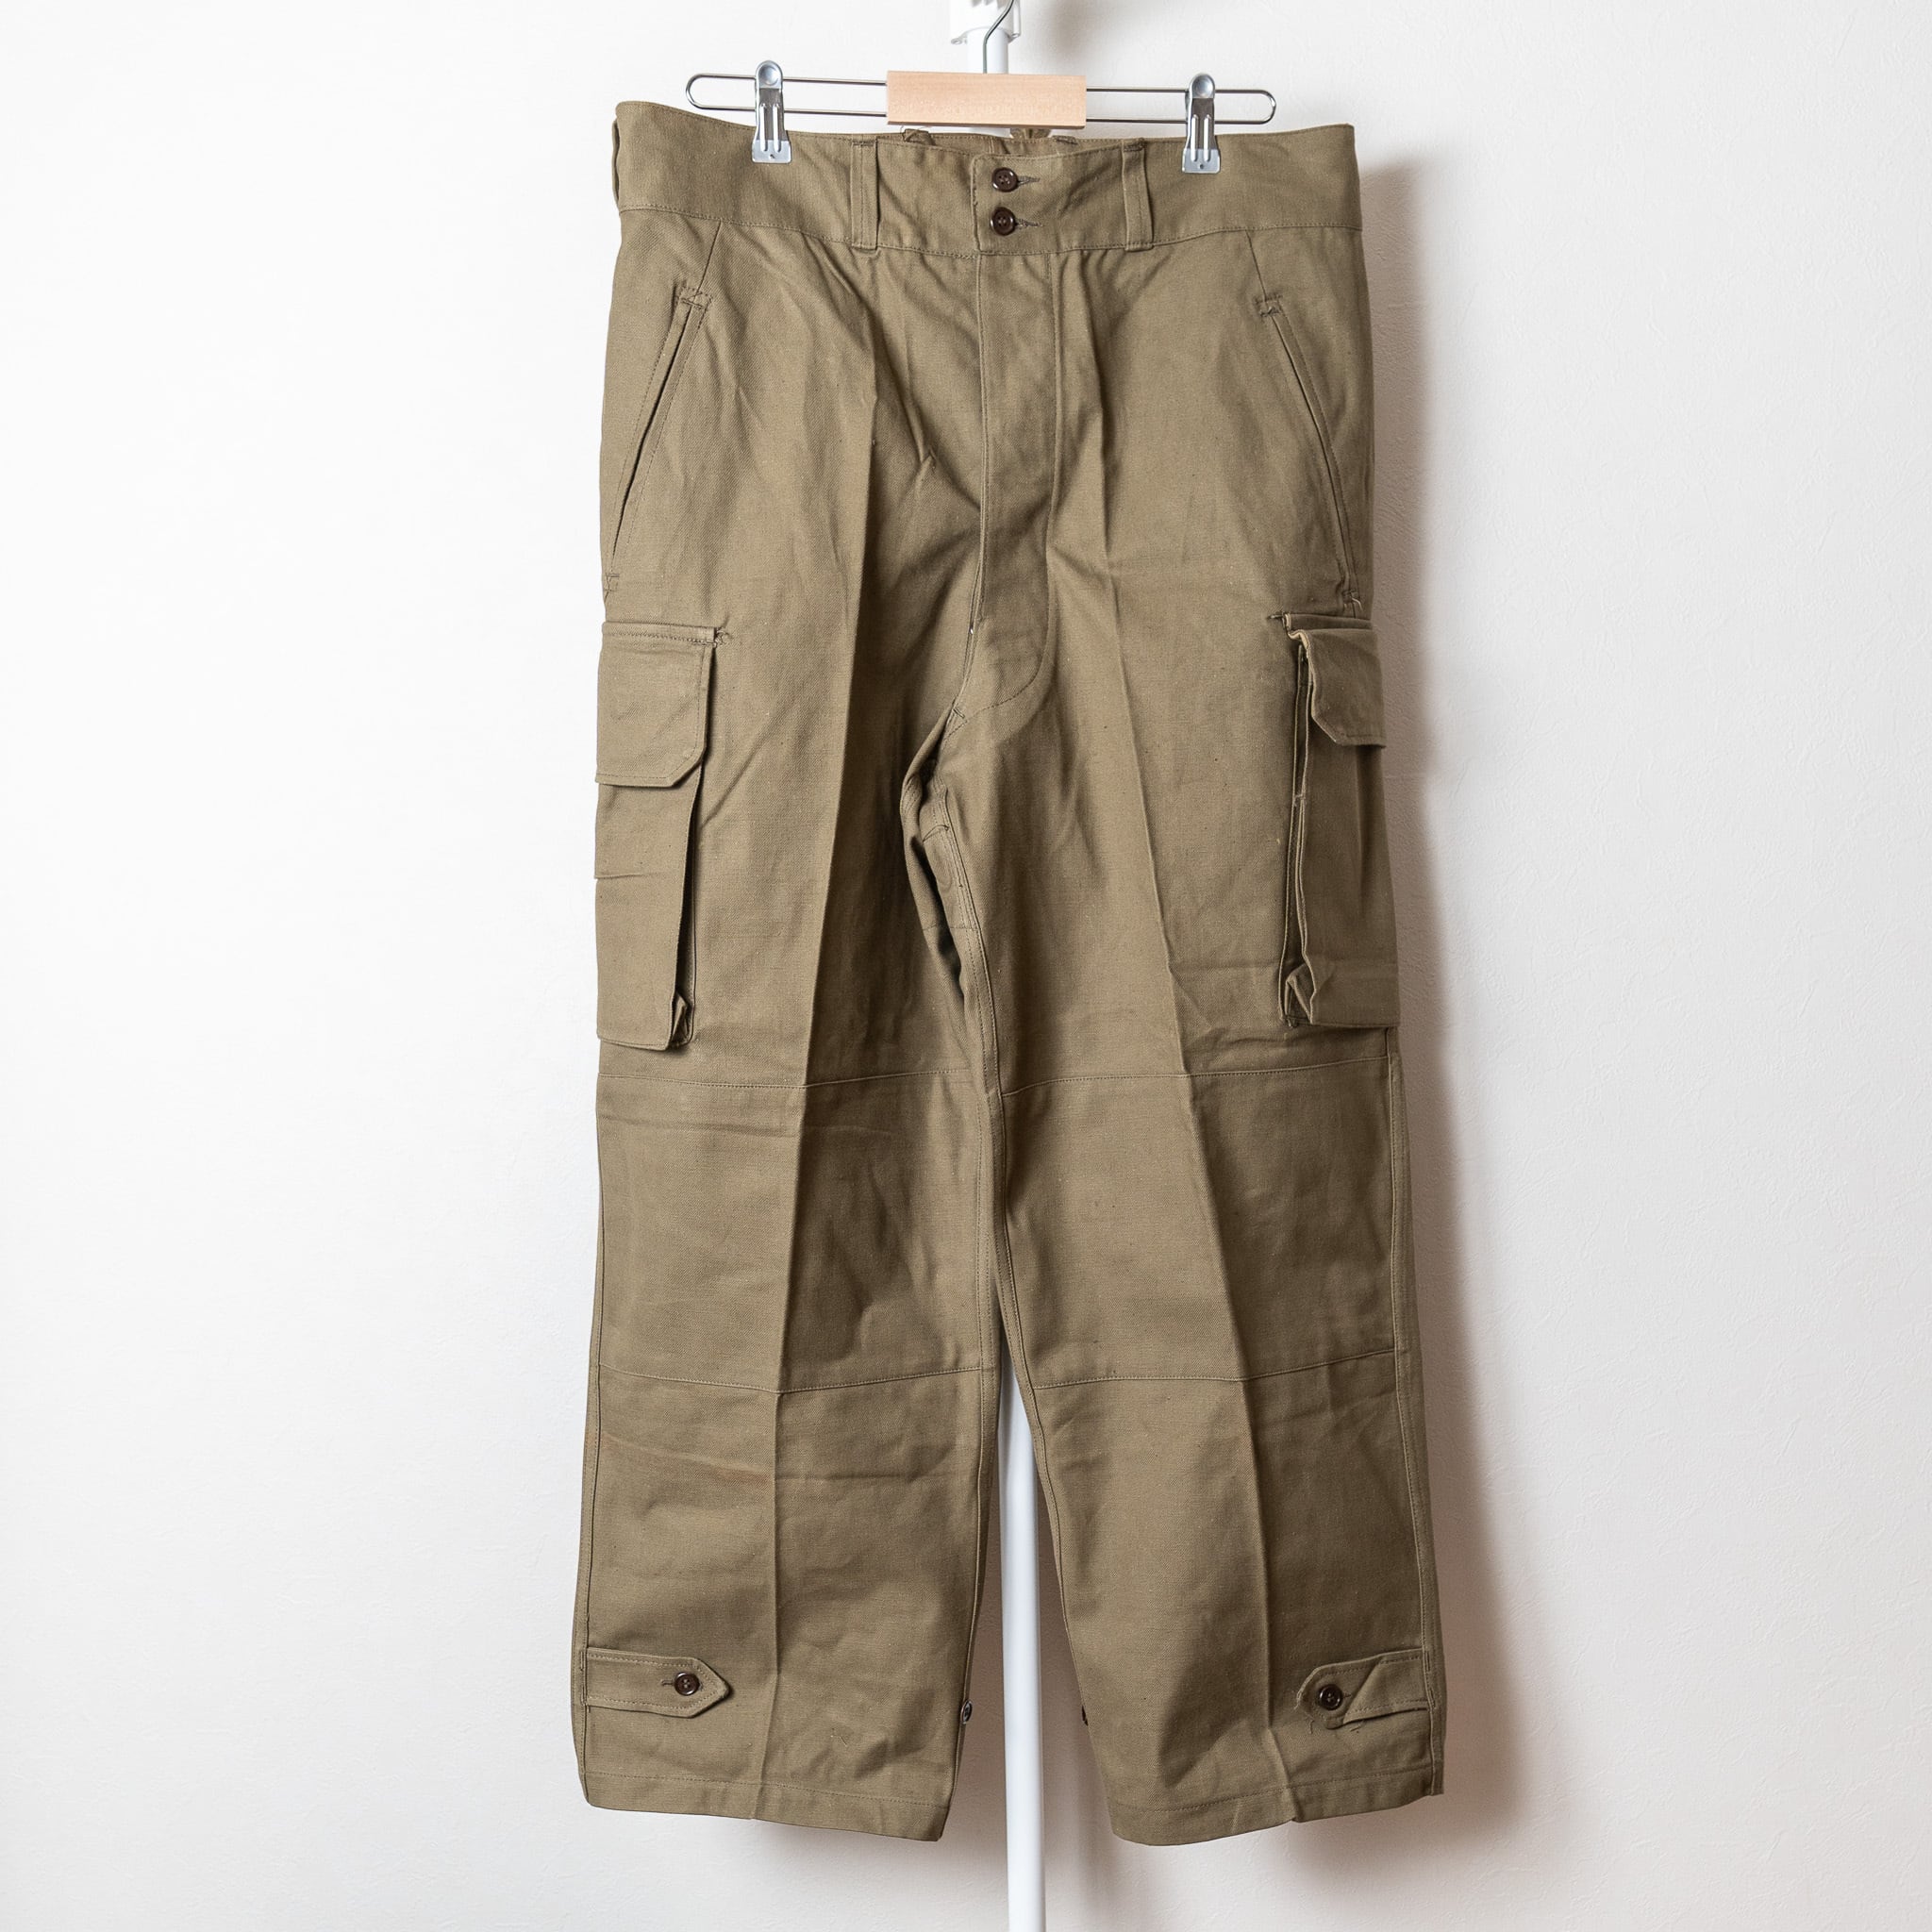 DEADSTOCK】French Army M-47 Trousers Early Model Size25 実物 フランス軍 M47 カーゴパンツ  前期型 デッドストック 希少 FAR EAST SIGNAL